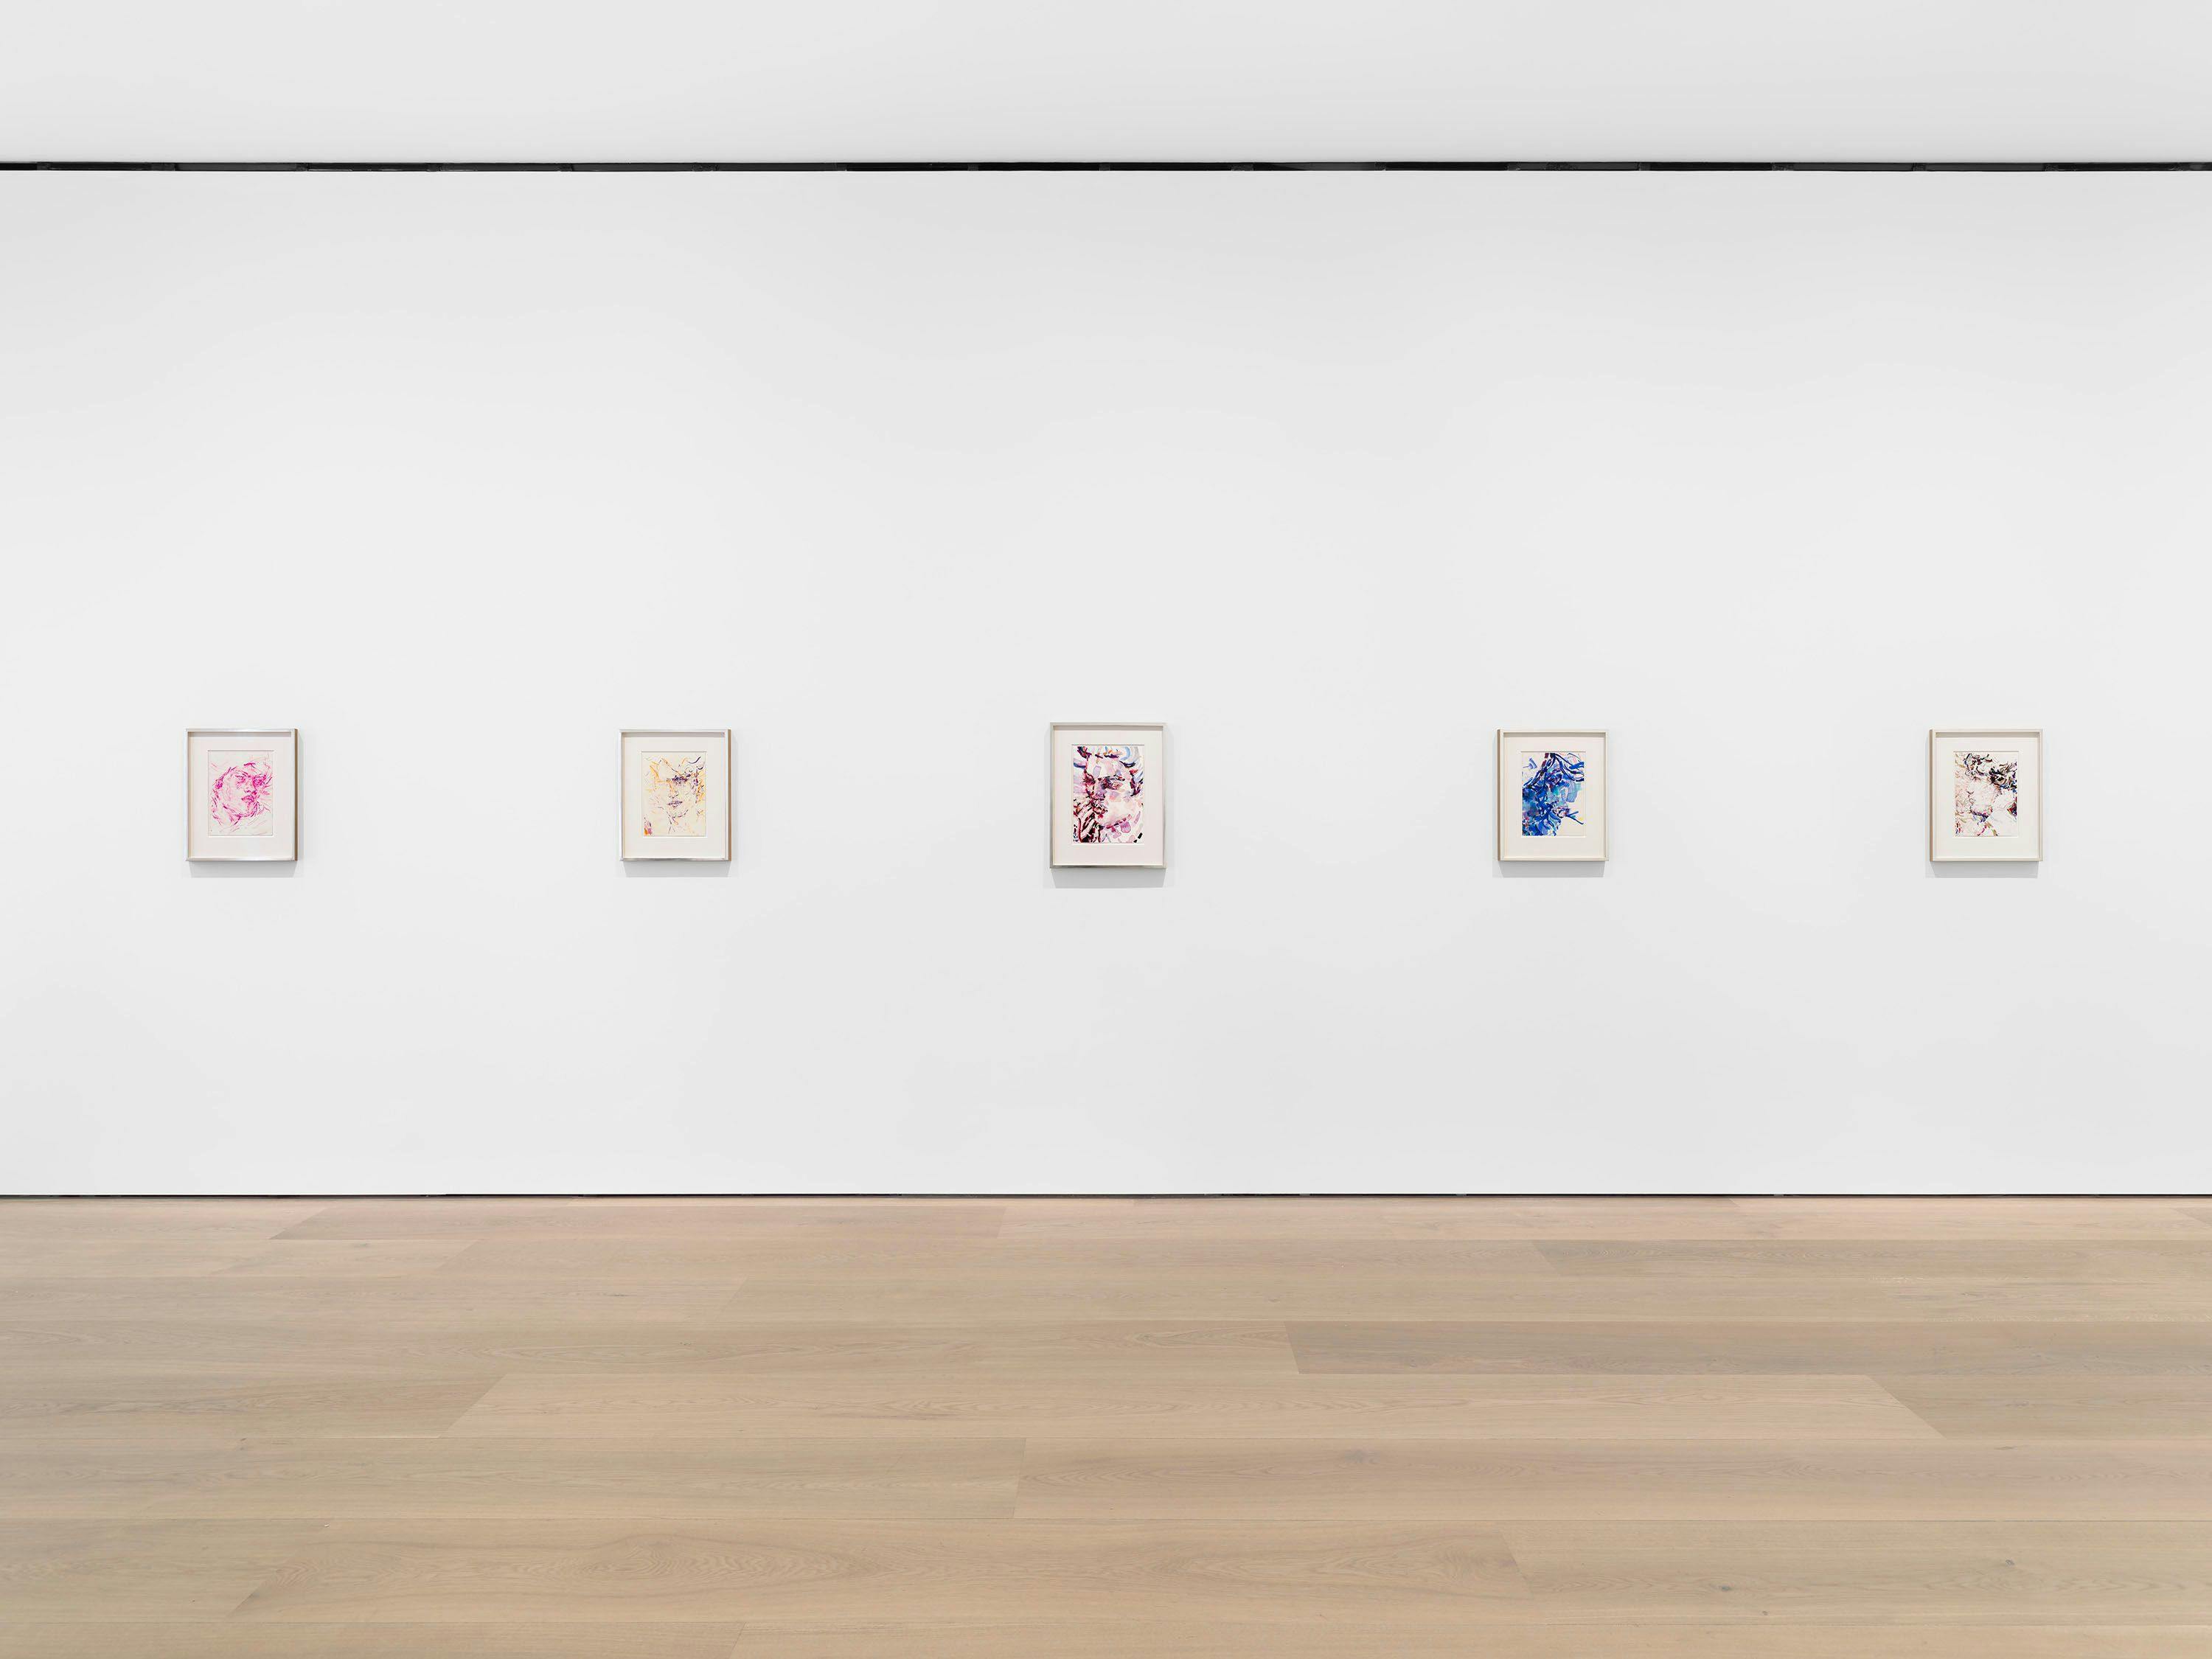 Installation view of the exhibition, Elizabeth Peyton: Angel, at David Zwirner in London, dated 2023.